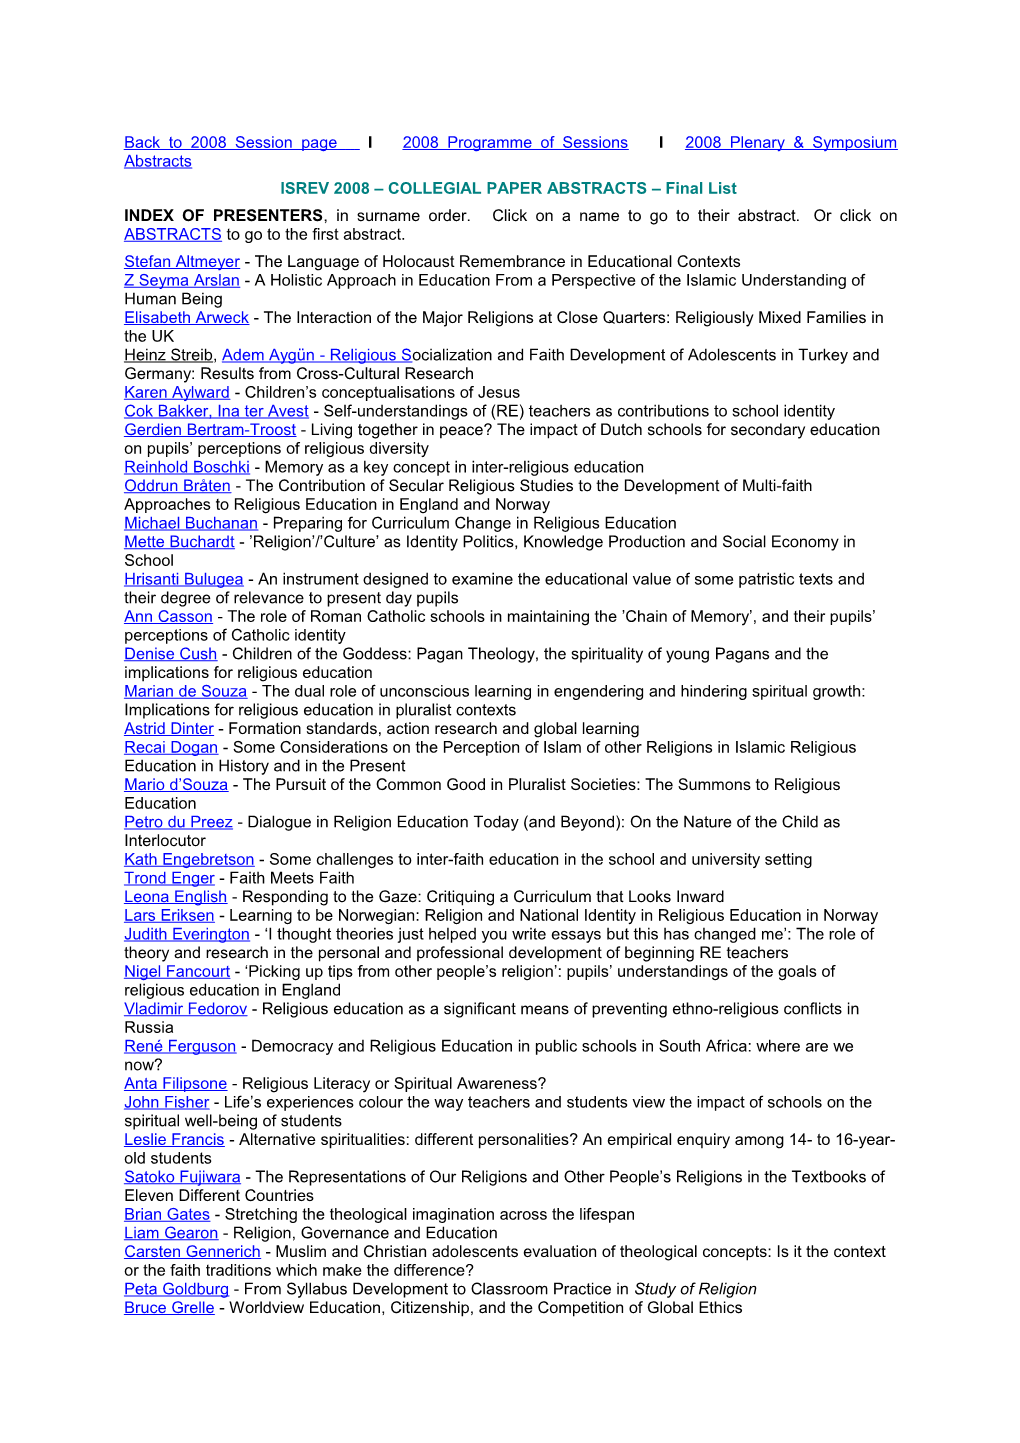 ISREV 2008 COLLEGIAL PAPER ABSTRACTS Final List